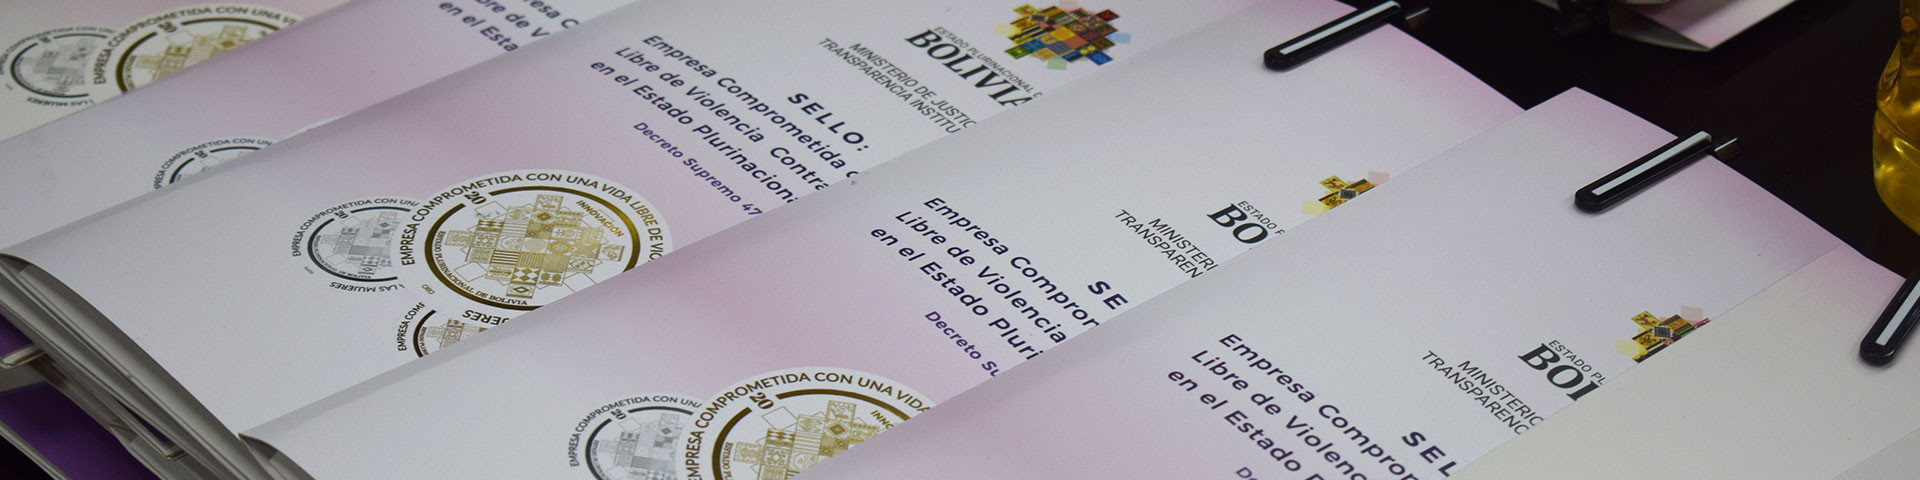 A close-up of several official papers.